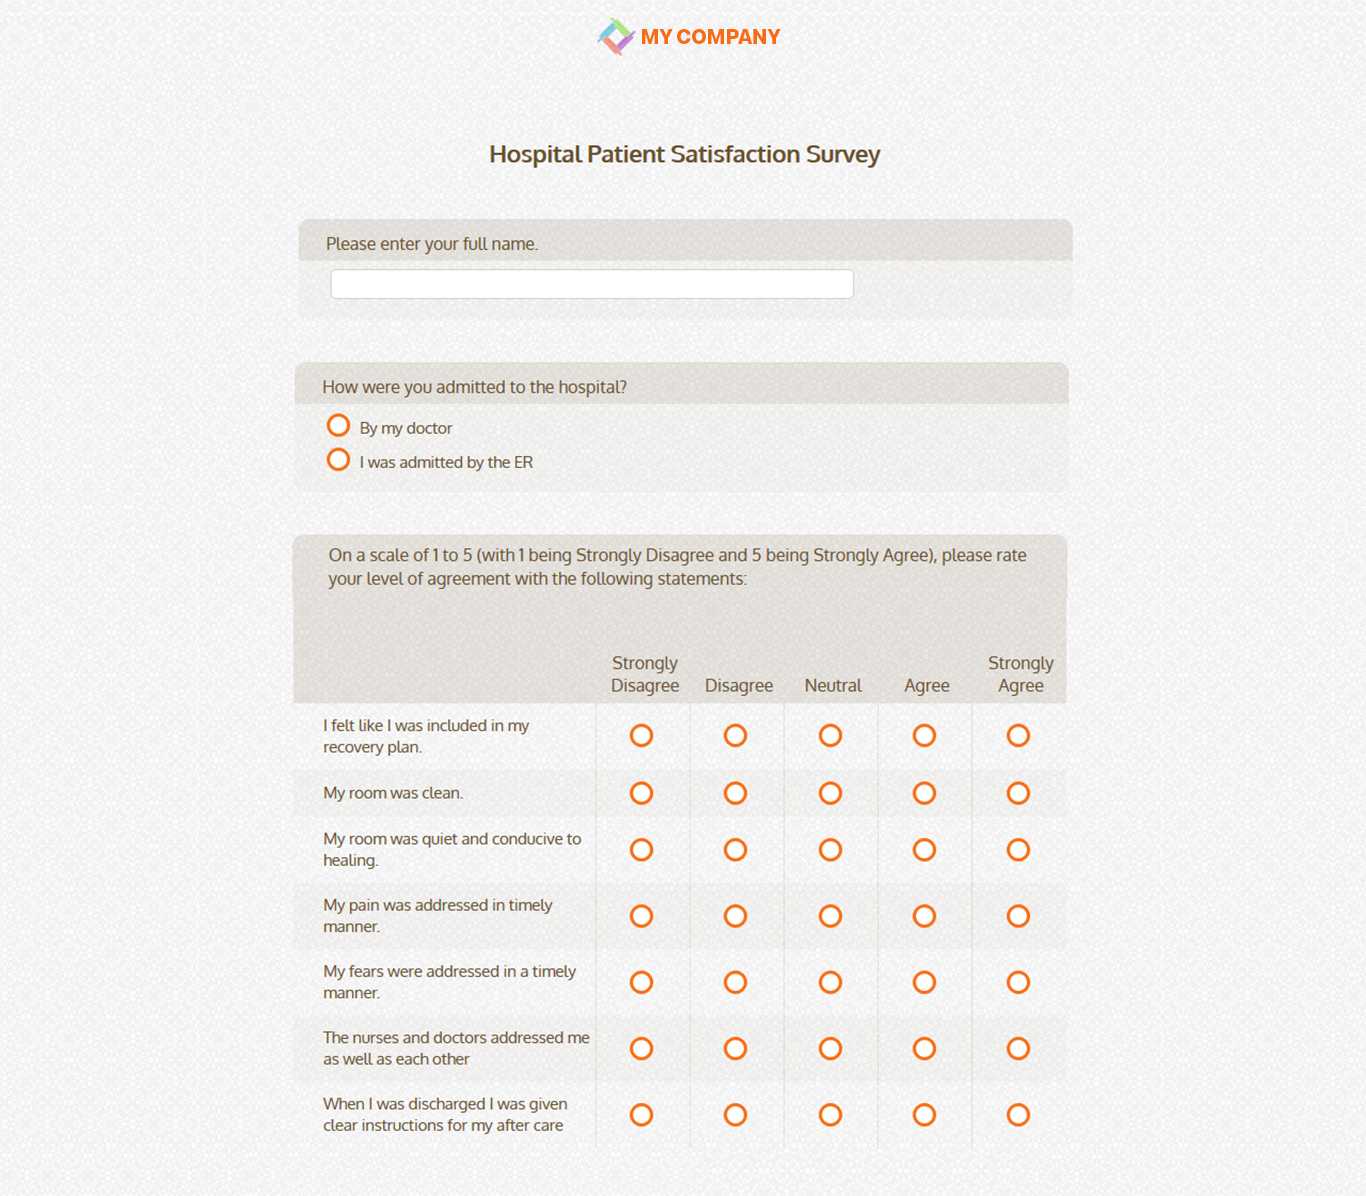 Patient Satisfaction Survey Template [21 Questions] | Sogosurvey Throughout Customer Satisfaction Report Template